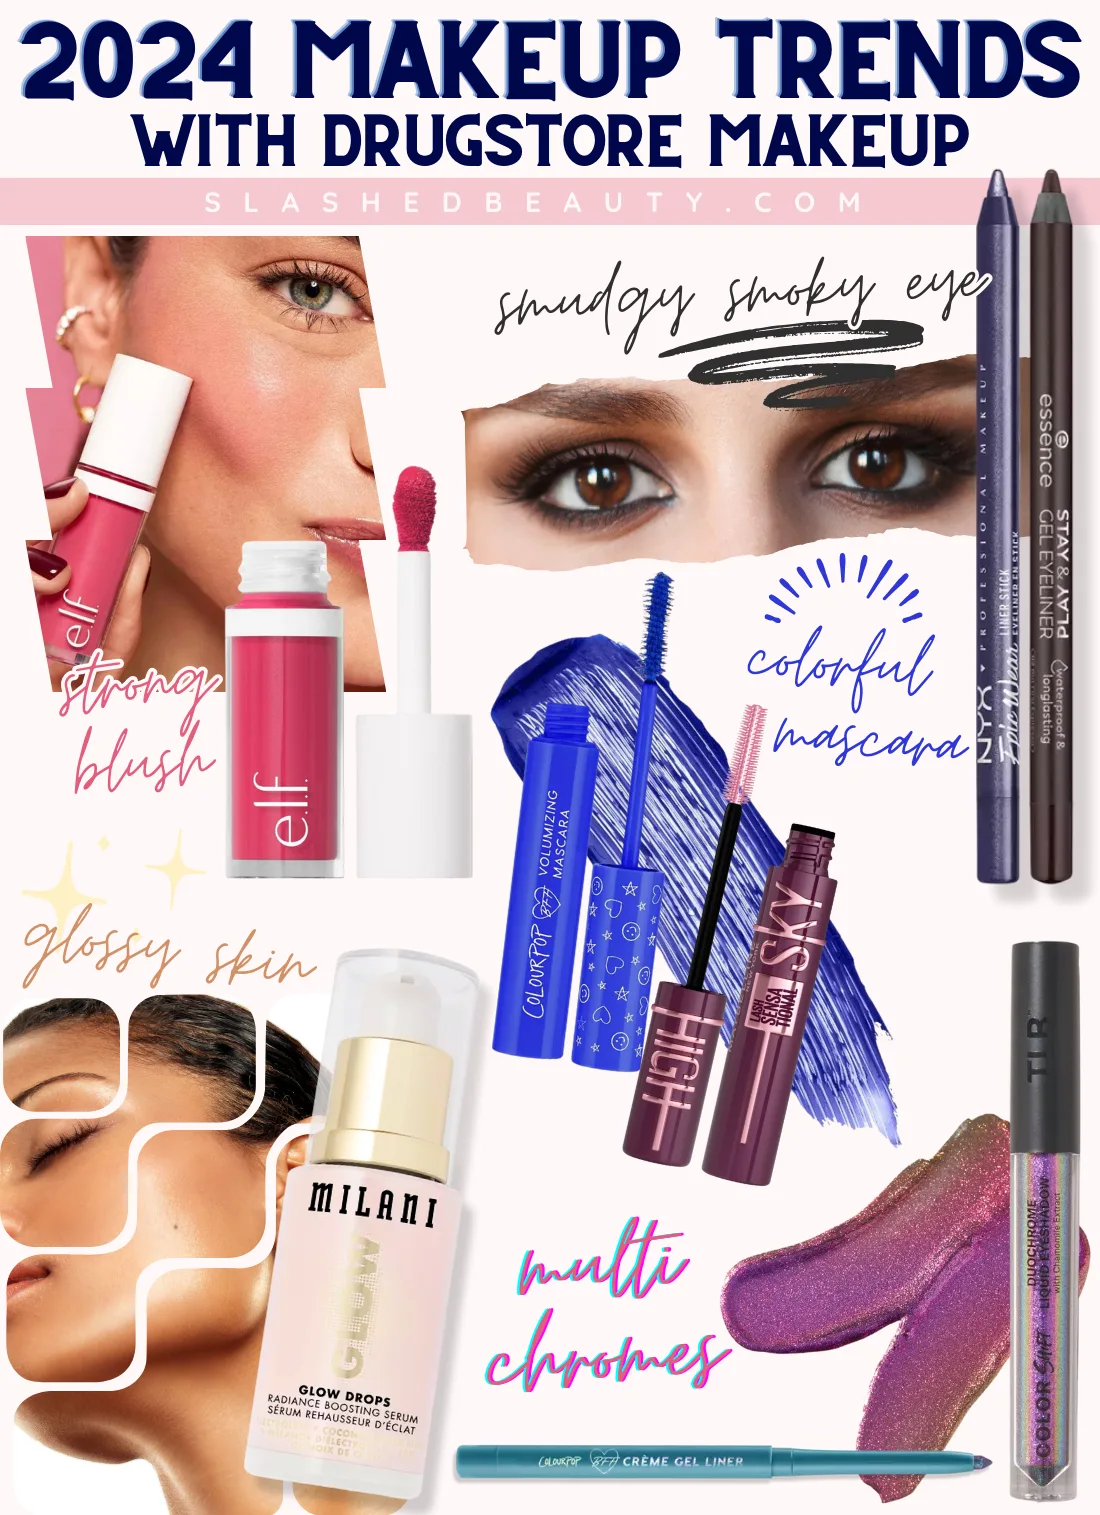 Collage of products and makeup looks with title: 2024 Makeup Trends with Drugstore Makeup